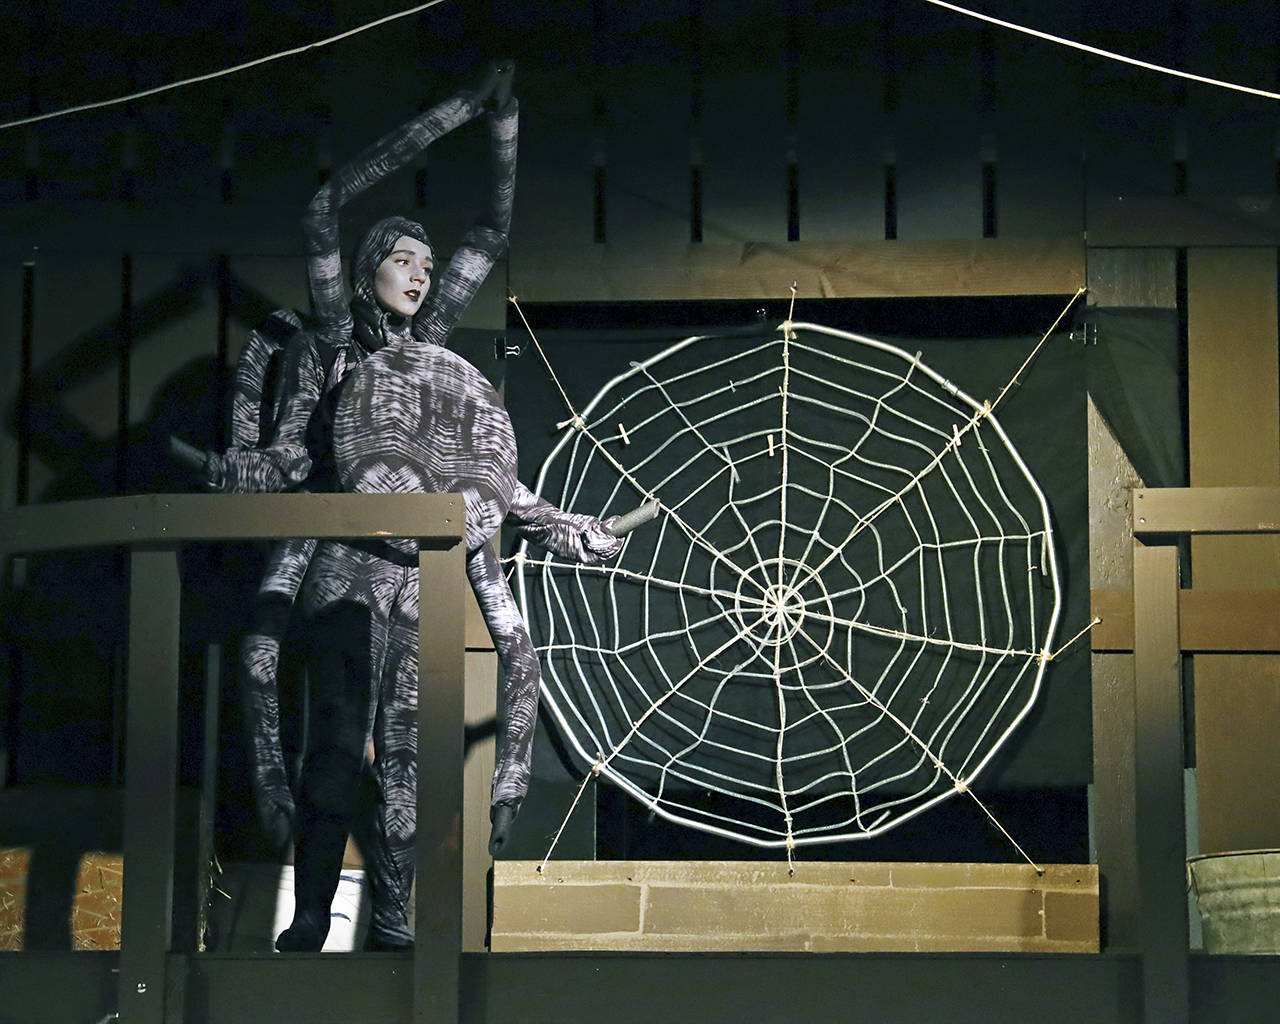 Charlotte the barn spider (played by Mikaela Murphy) speaks from the rafters.